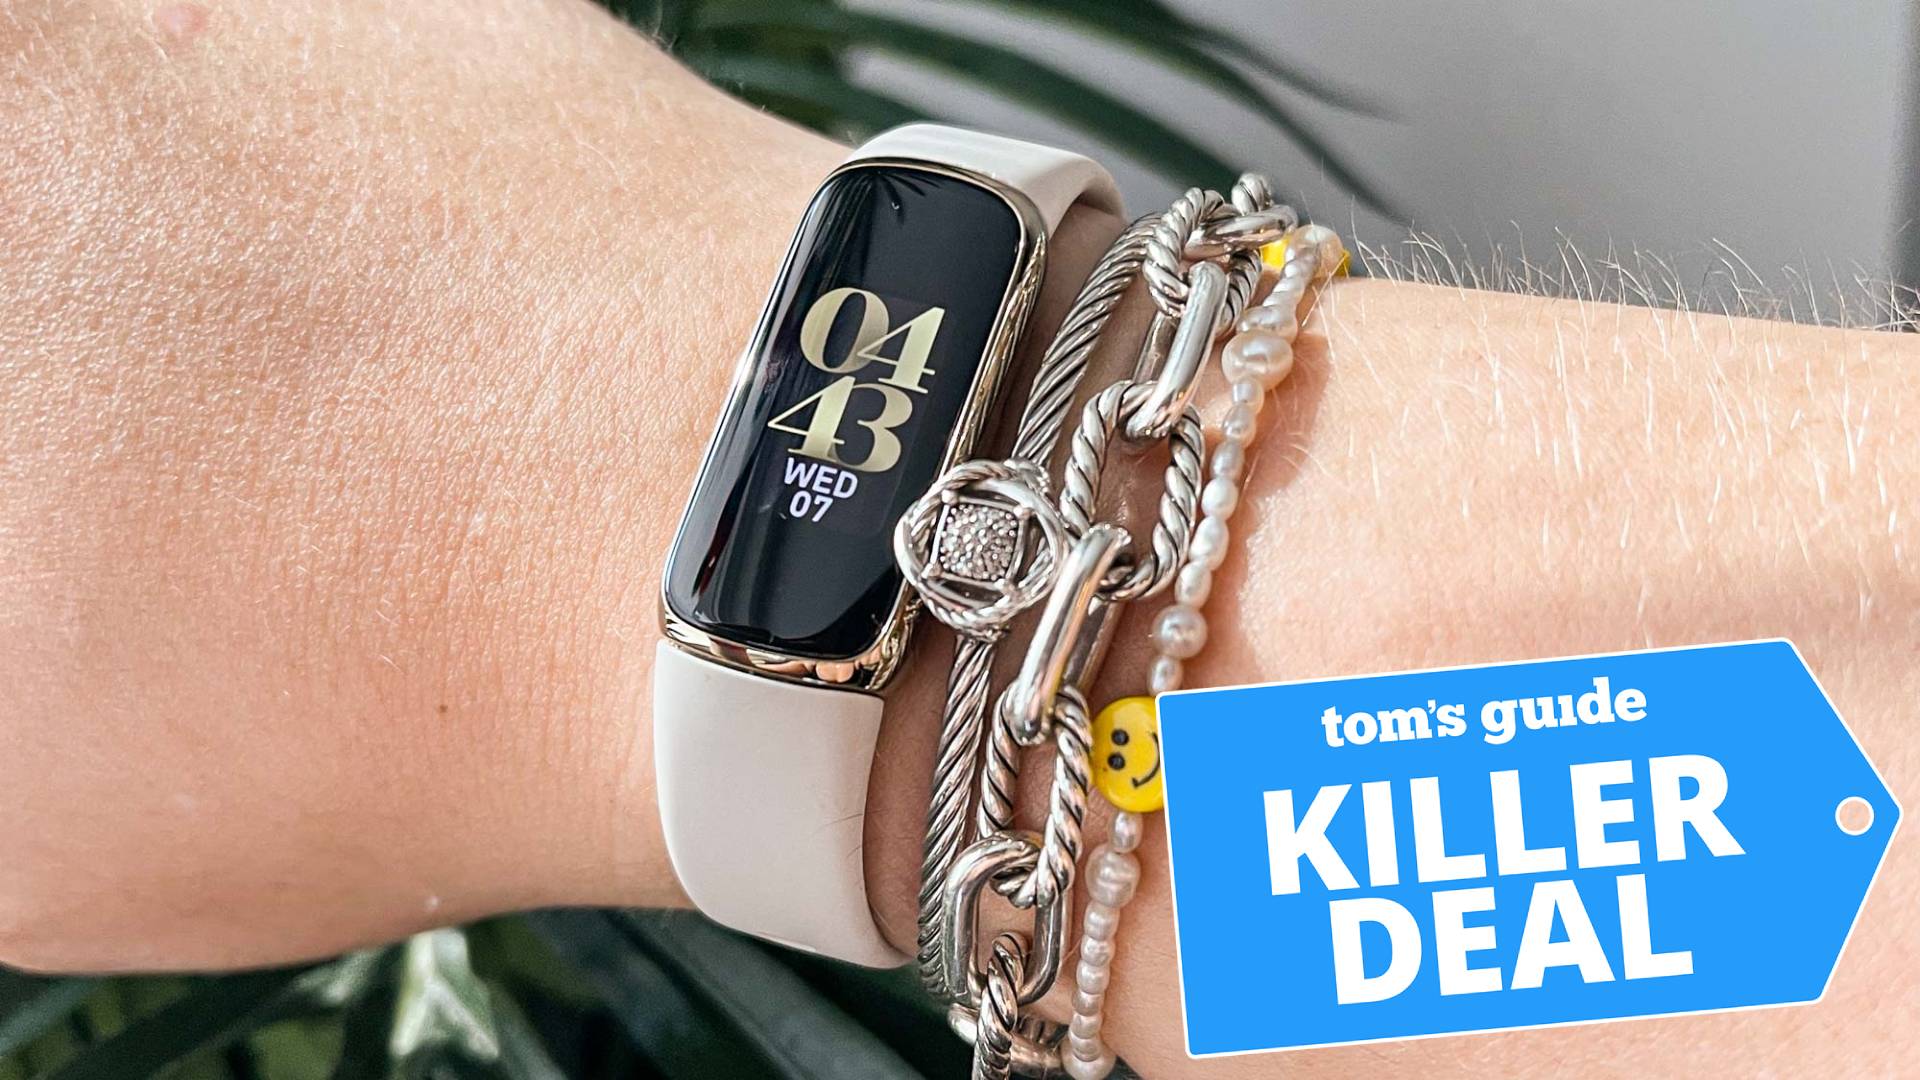 Image of a person wearing a Fitbit Luxe watch on their wrist.  The "Fatal deal from Tom's Guide" The tag is overlaid.